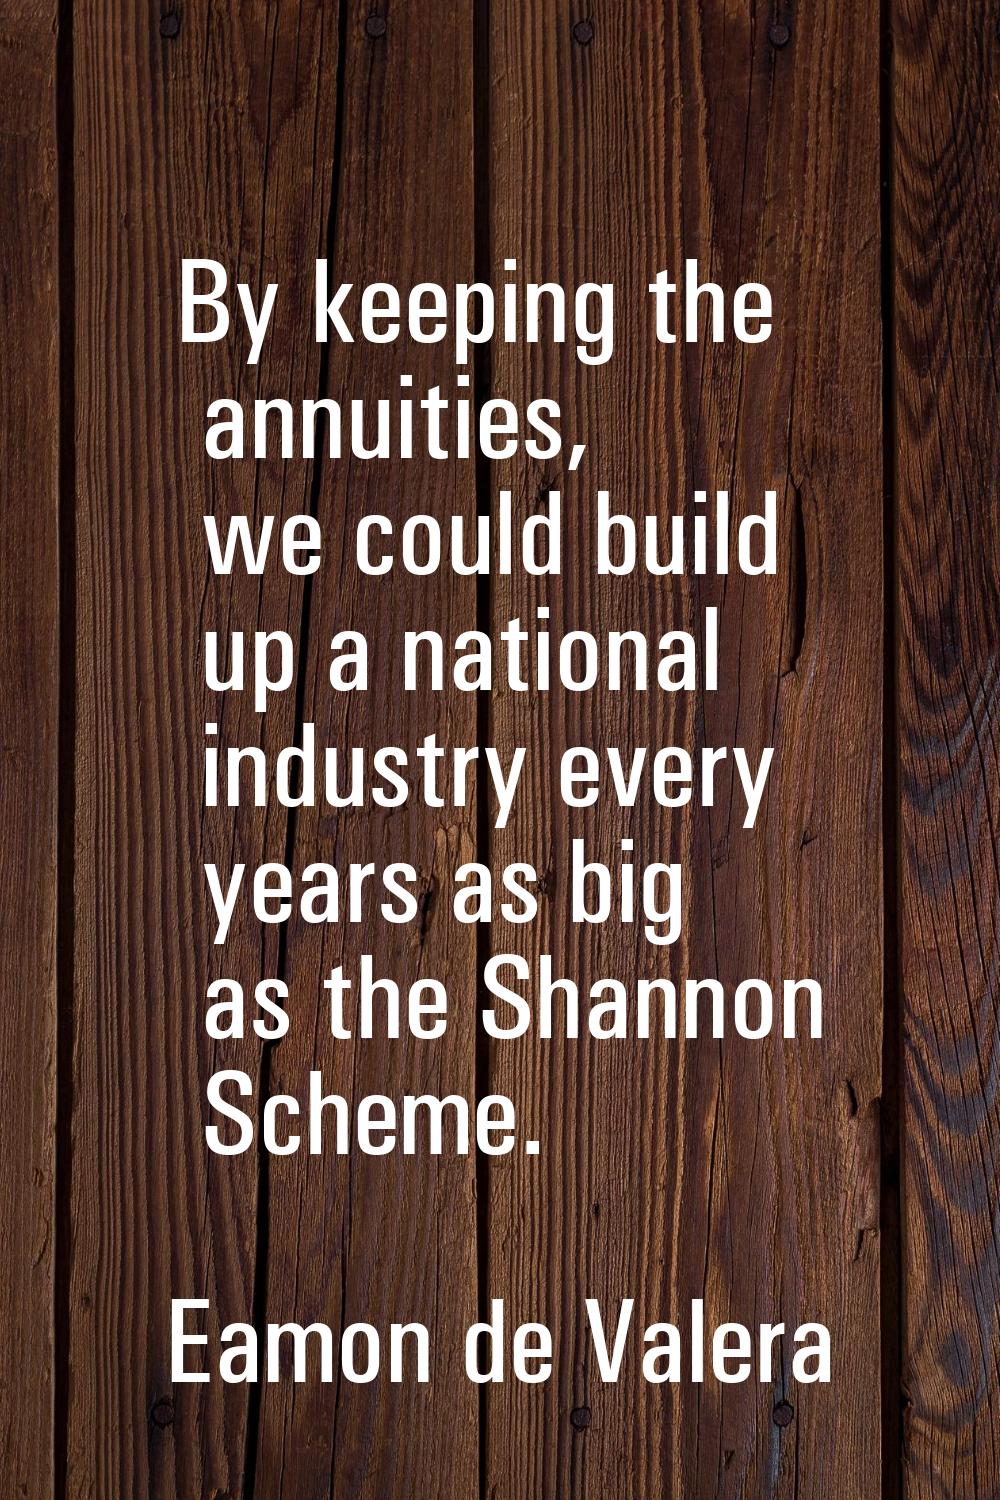 By keeping the annuities, we could build up a national industry every years as big as the Shannon S